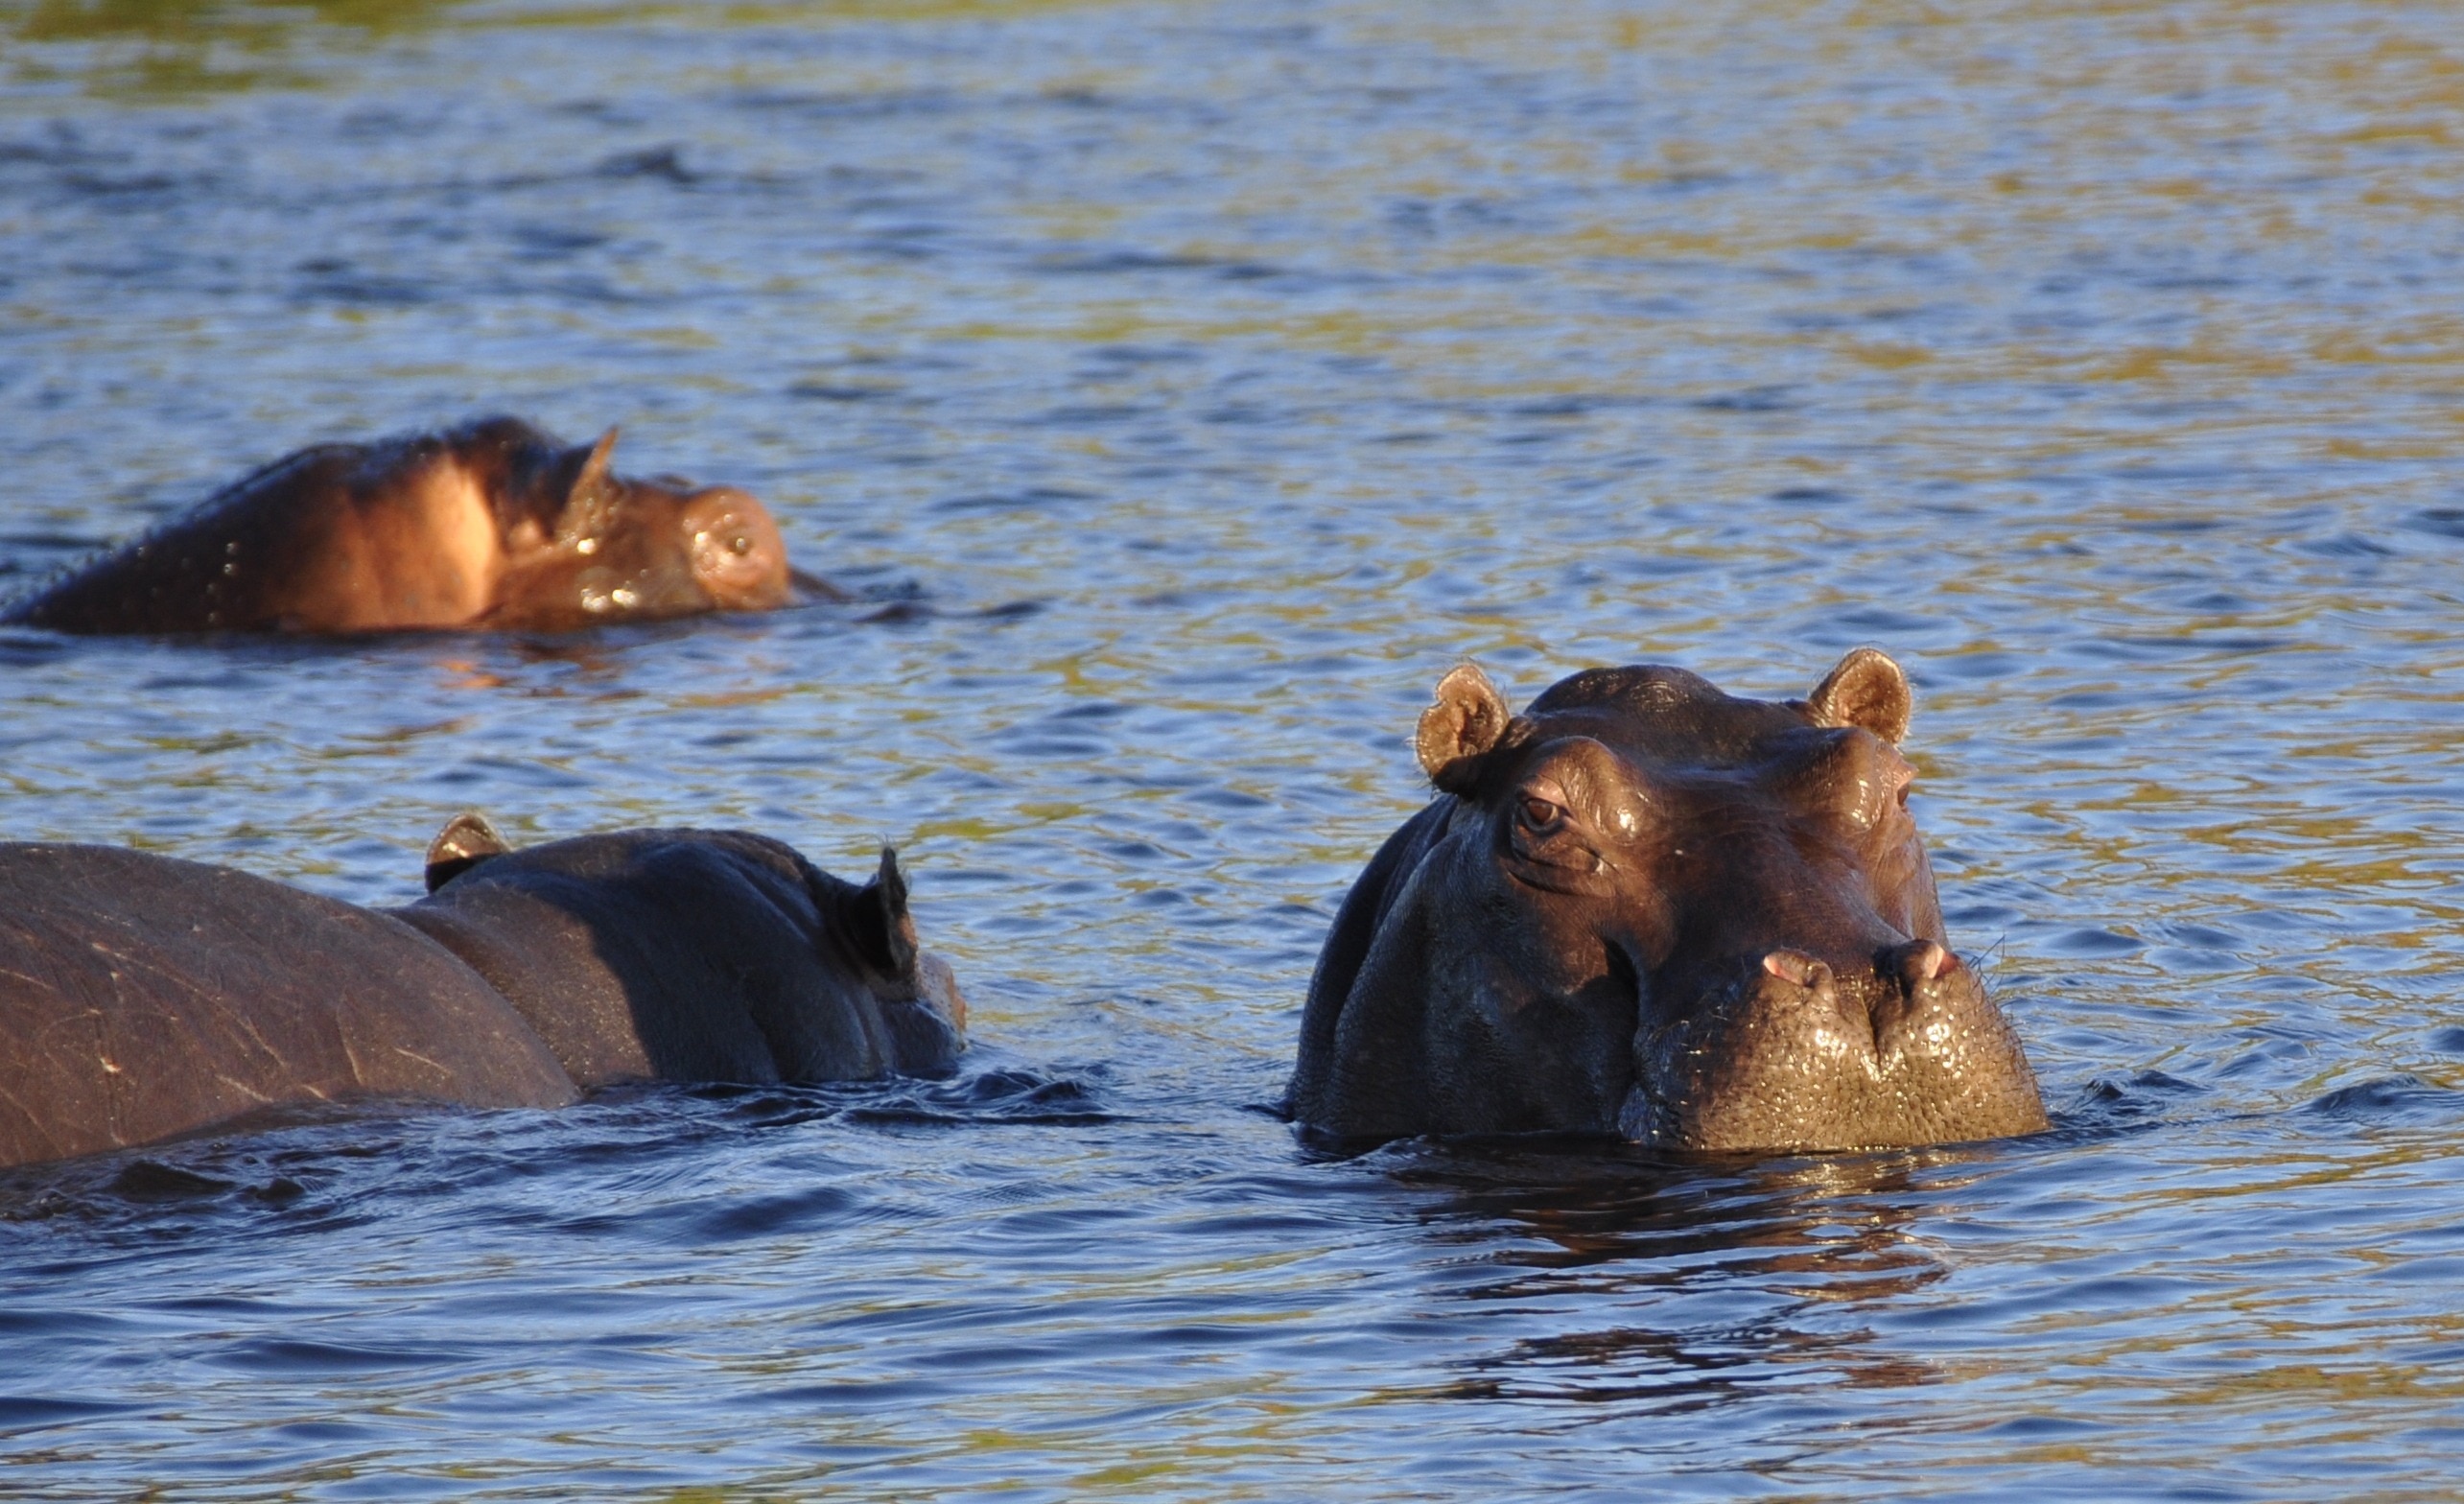 gray Hippopotamus in body of water during day time